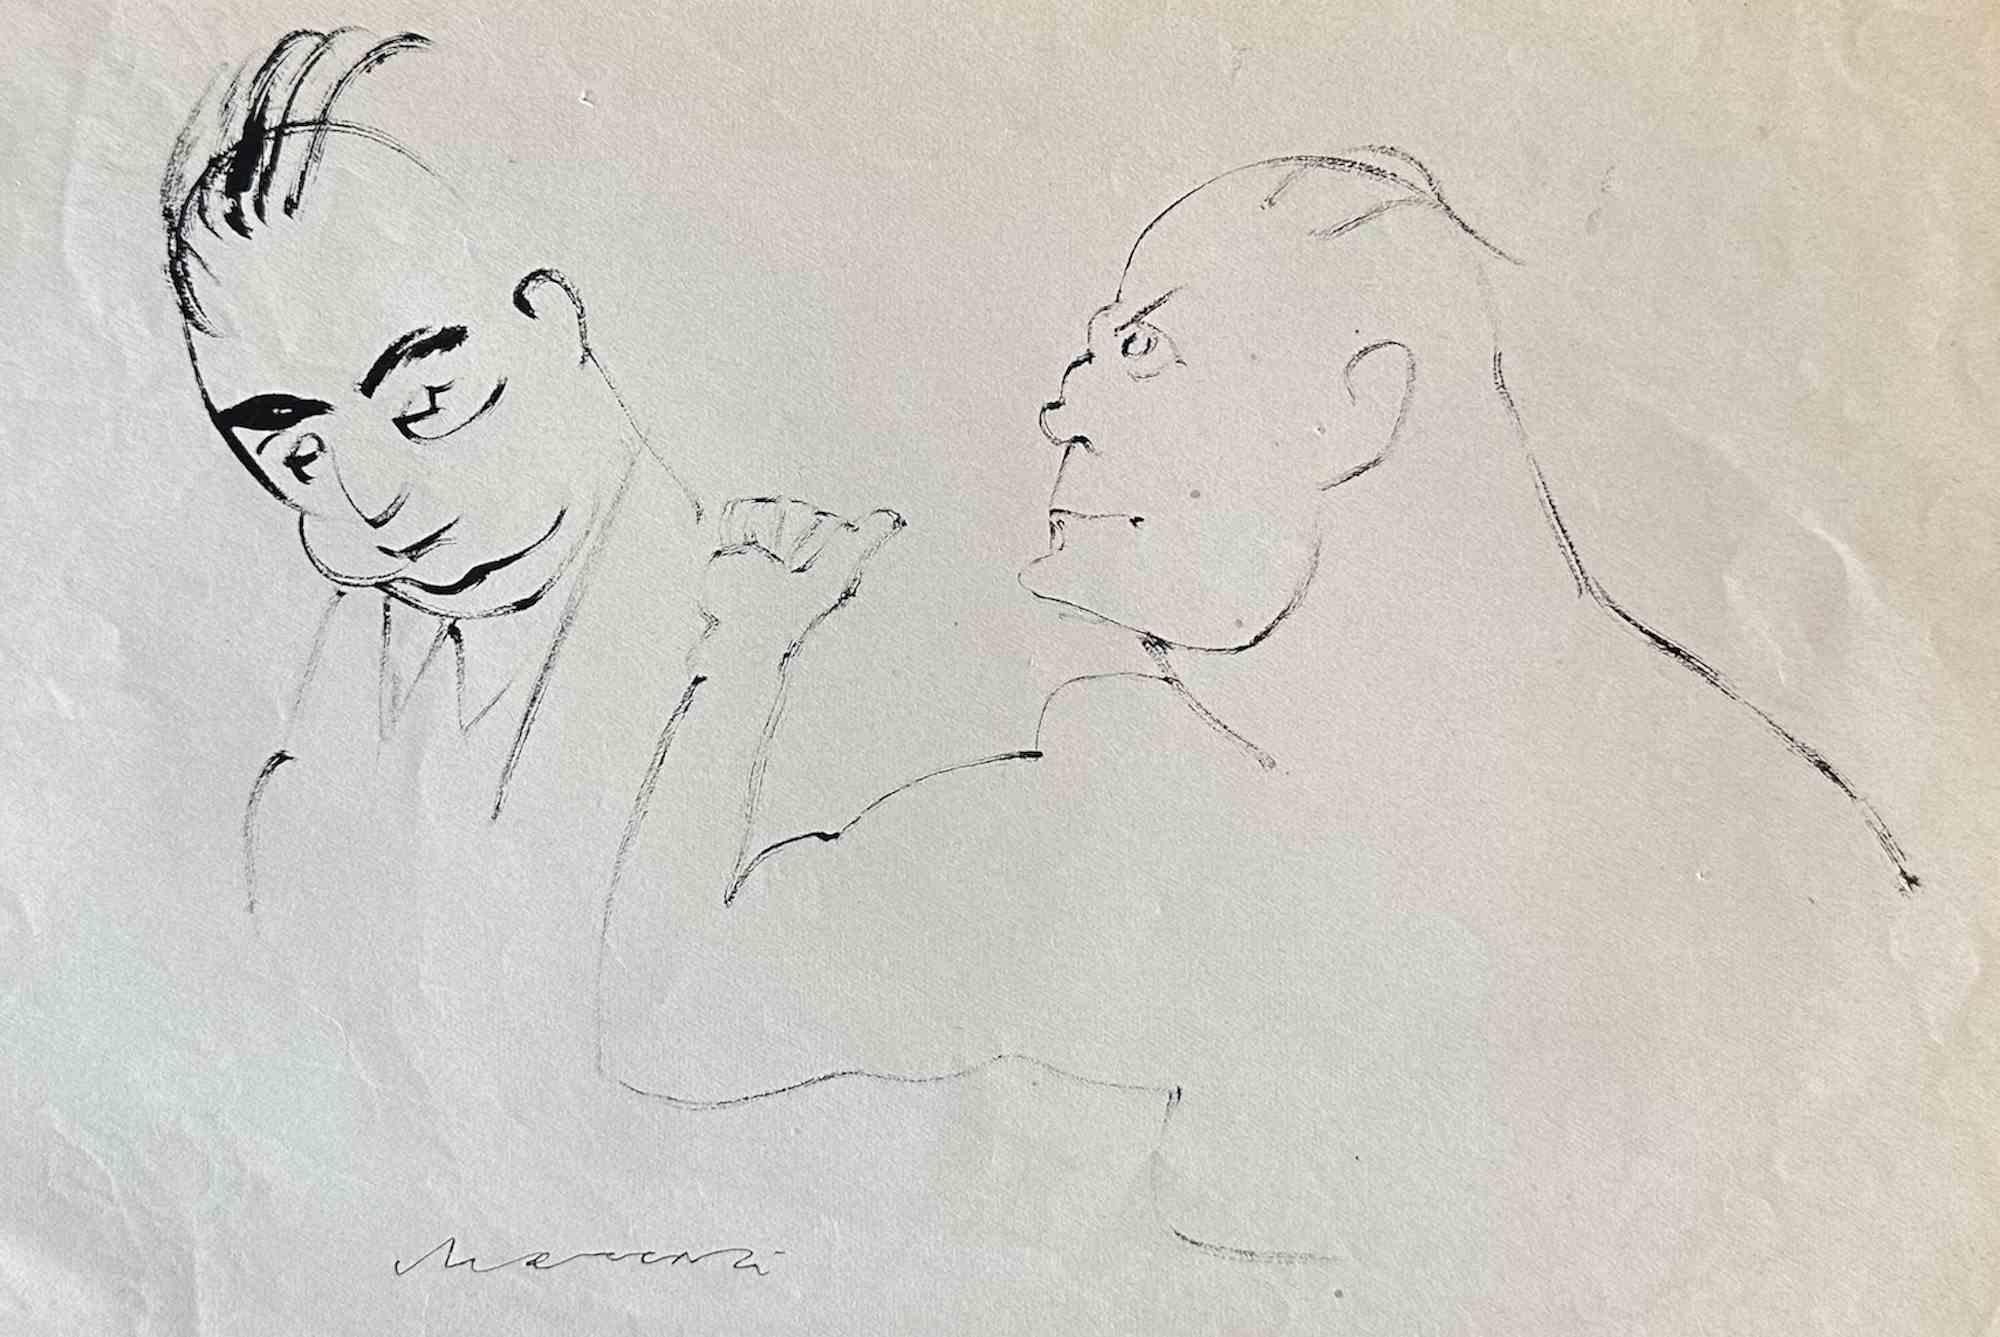 The Rage is a Pen Drawing realized by Mino Maccari  (1924-1989) in the 1960s.

Hand-signed on the lower margin.

Good condition.

Mino Maccari (Siena, 1924-Rome, June 16, 1989) was an Italian writer, painter, engraver and journalist, winner of the